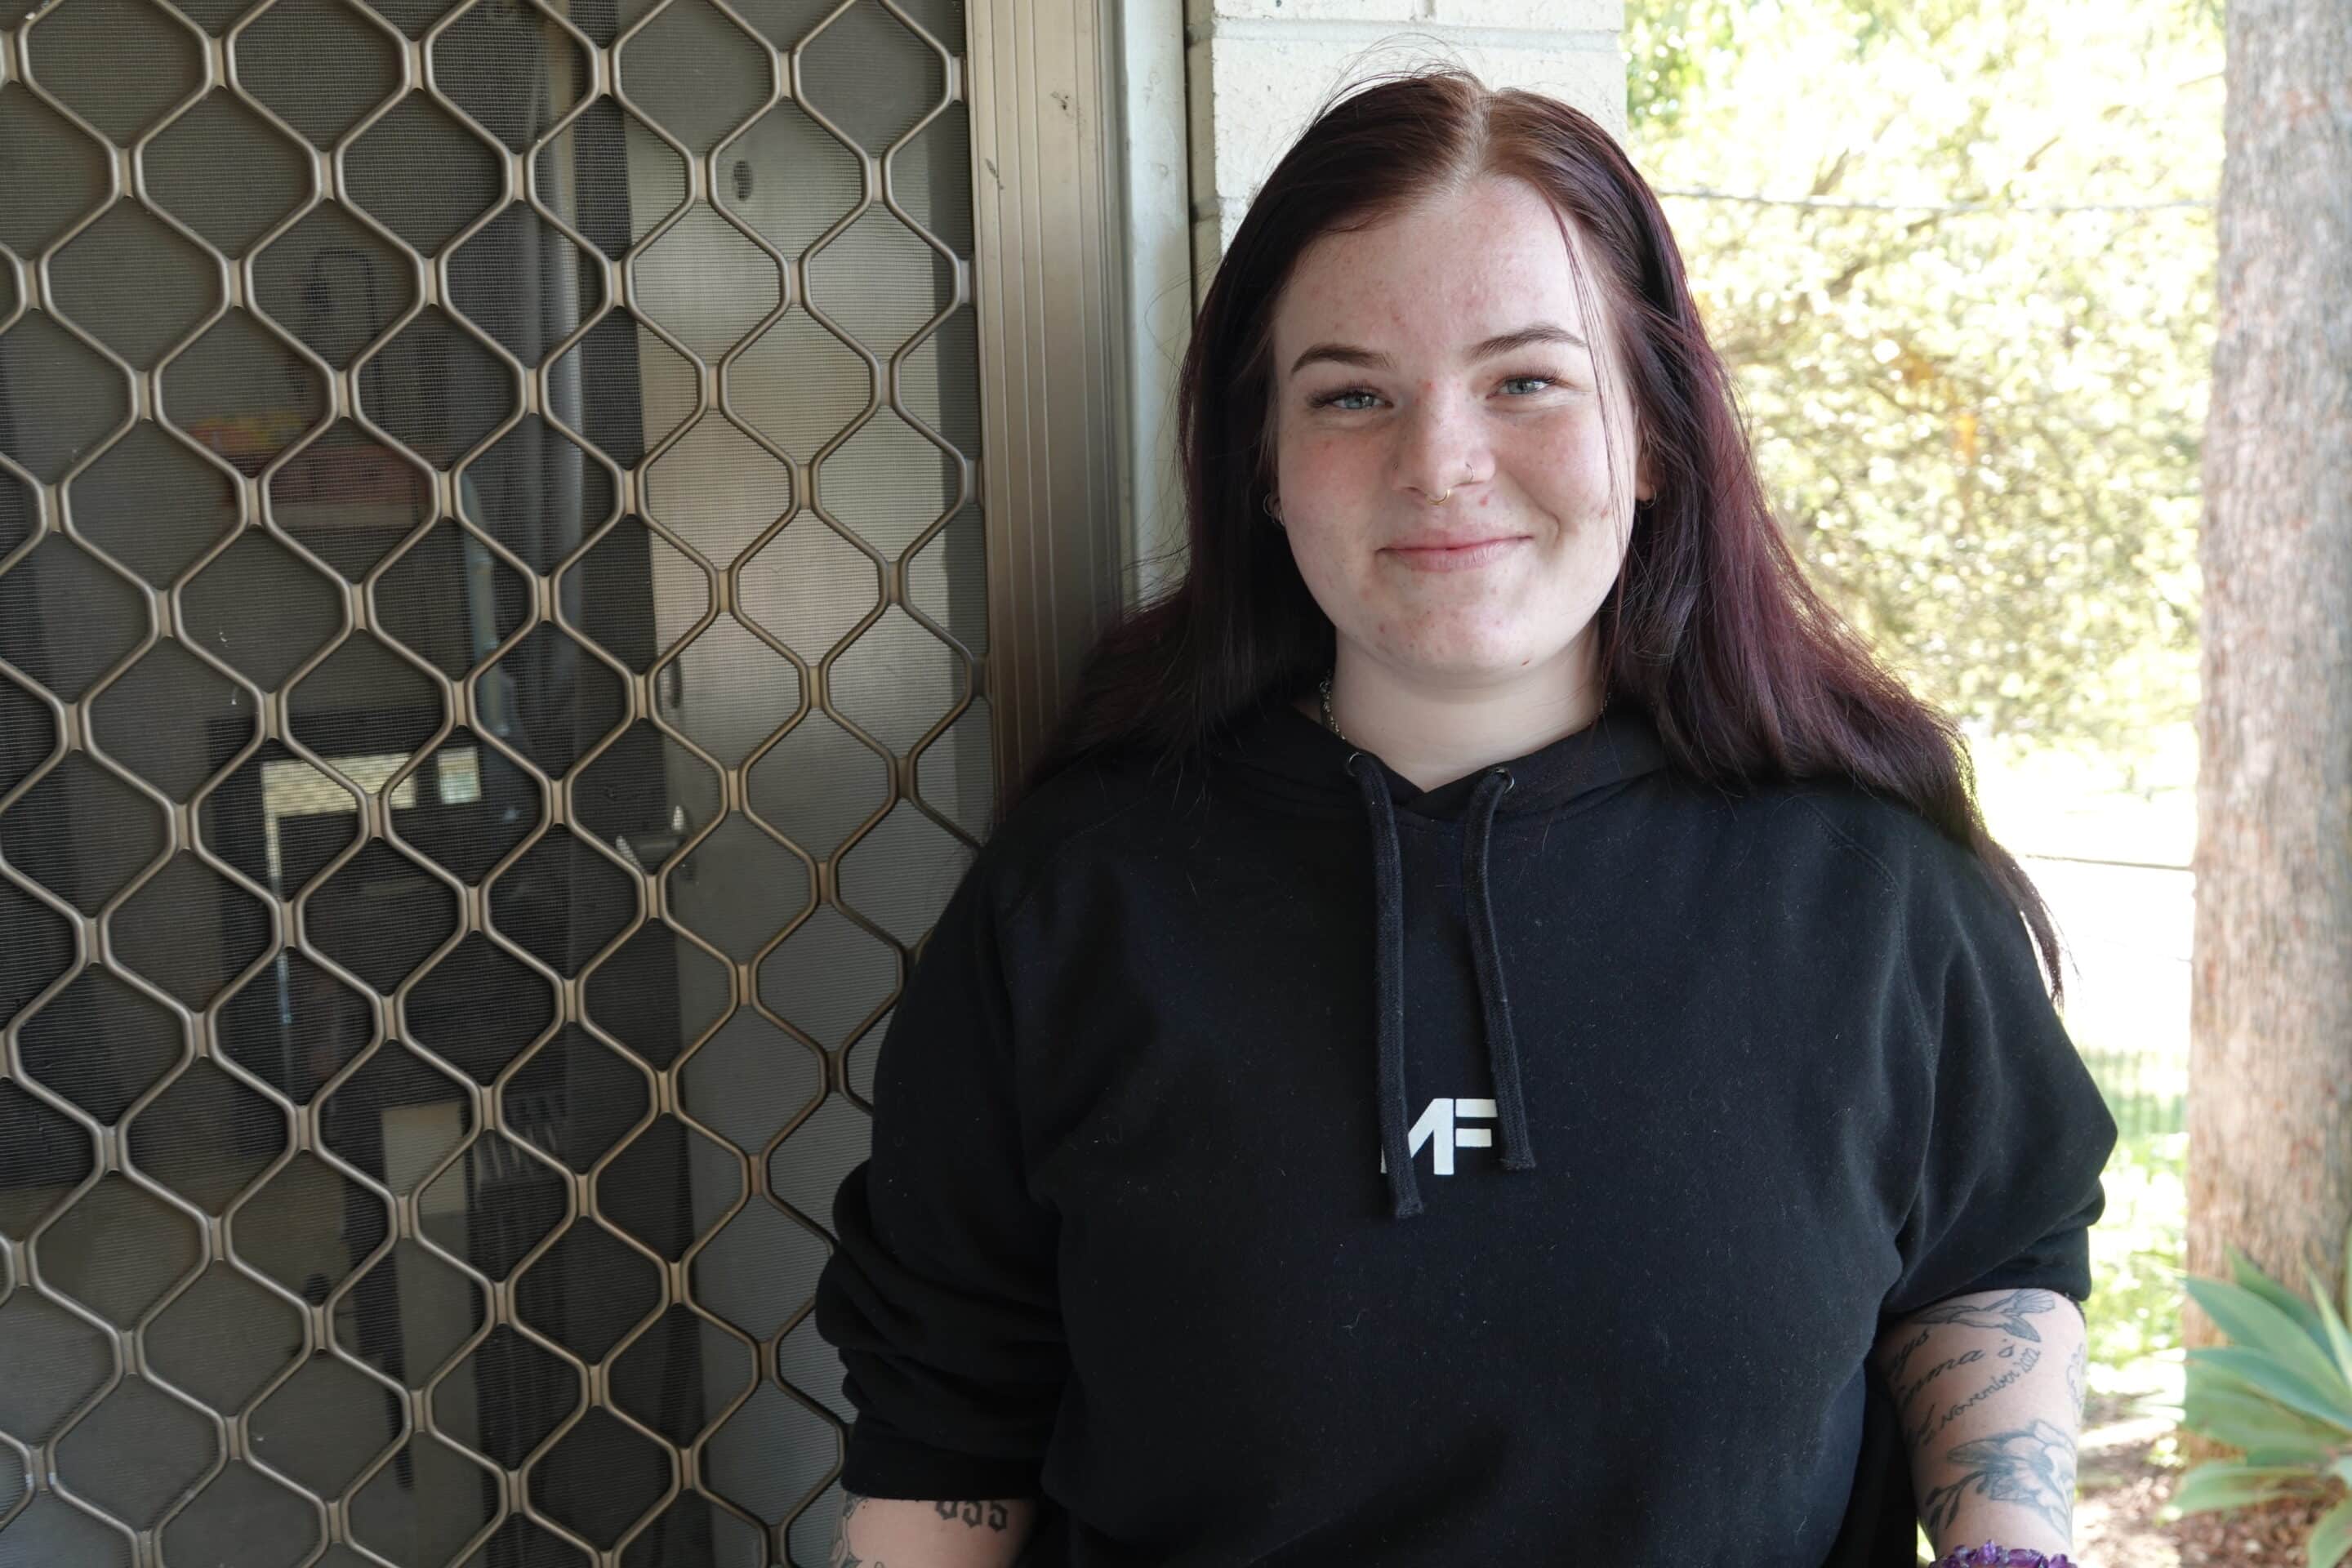 Homelessness can happen to anyone. This is Emma’s Story.